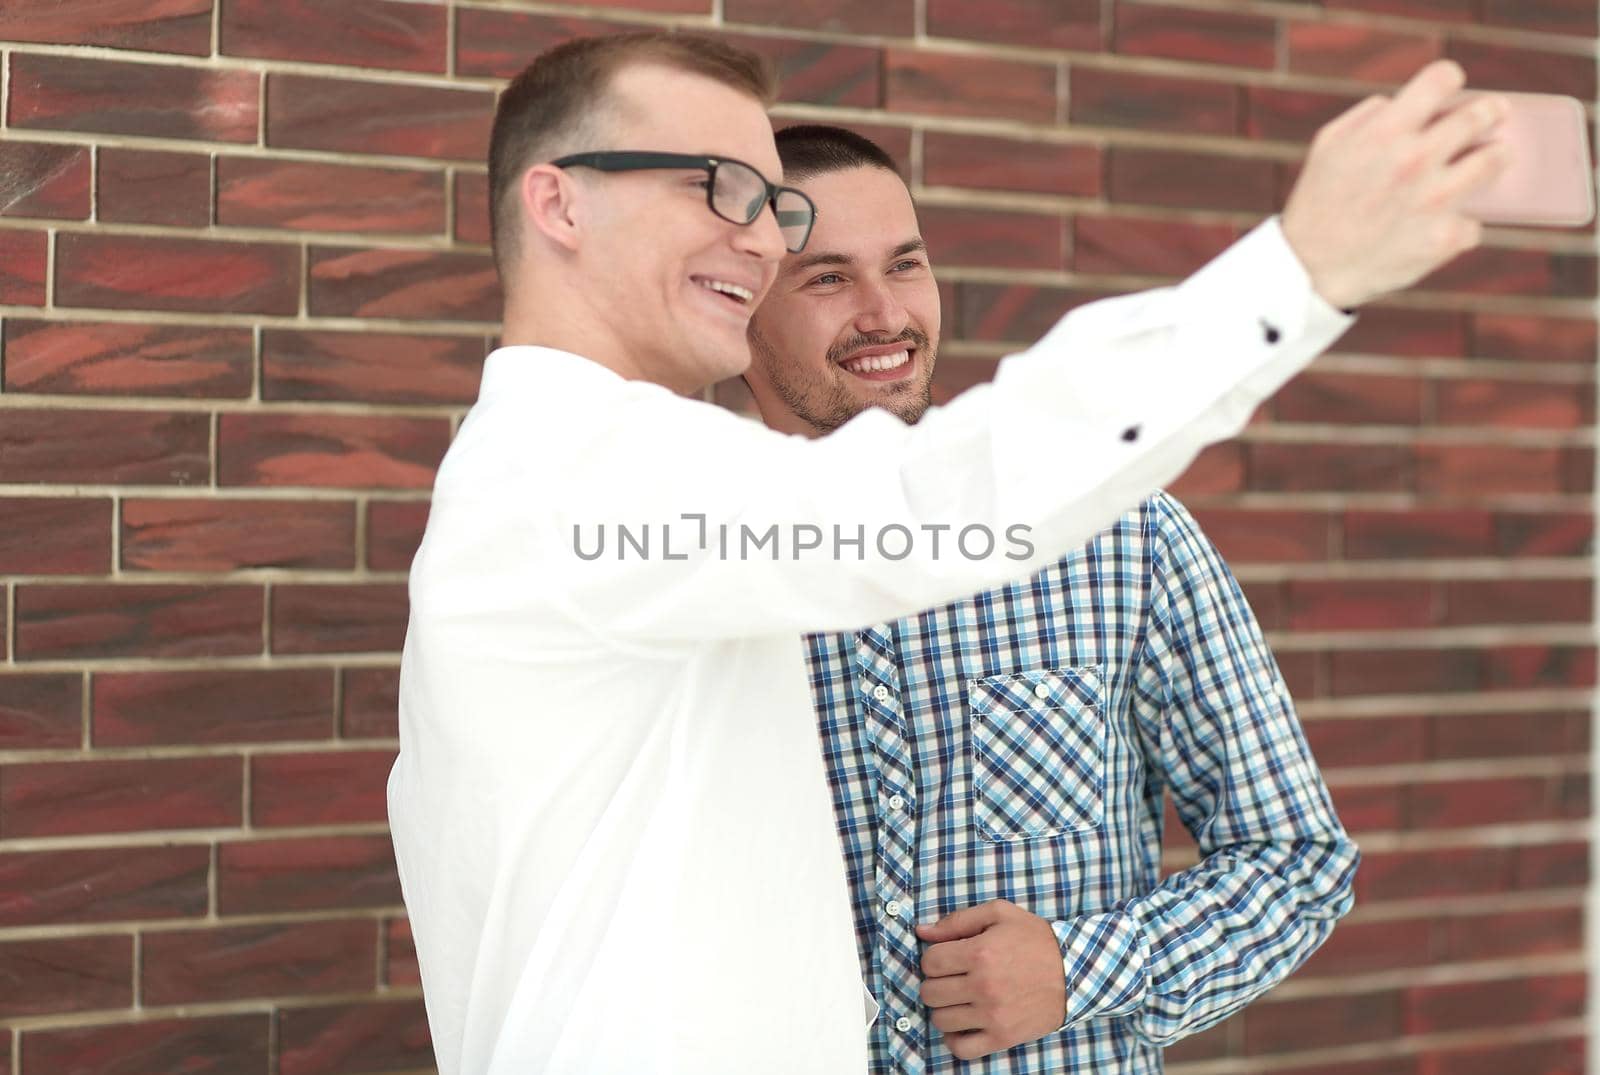 two young men taking selfies standing near a brick wall .people and technology